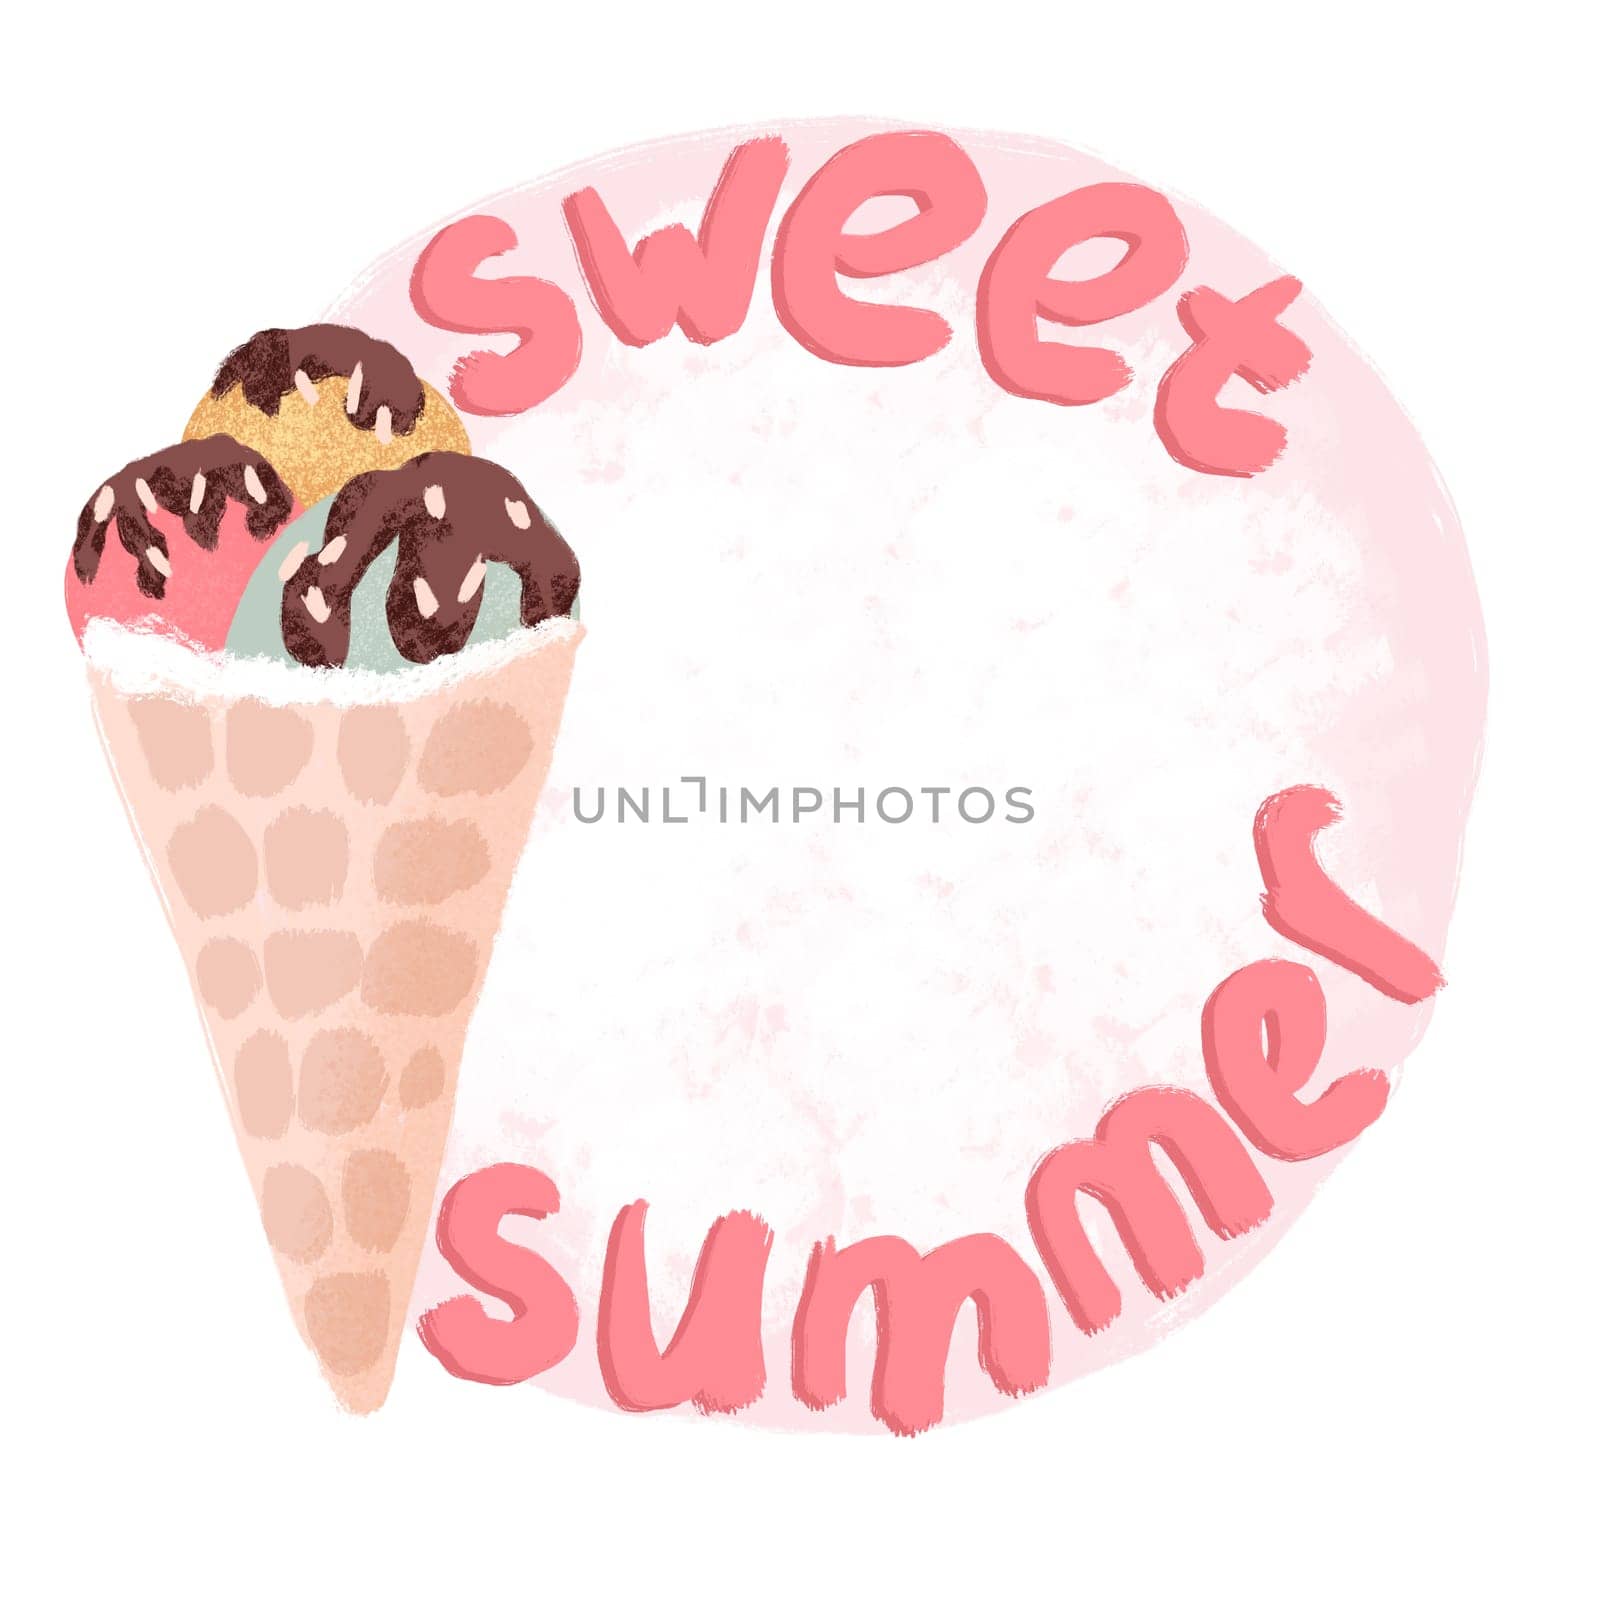 Hand drawn round frame with ice cream in cone, retro vintage style. Pink mint yellow round shape with chocolate, sweet tasty summer holiday food, fun design for colorful beach art. Tasty dessert sweet summer round shape